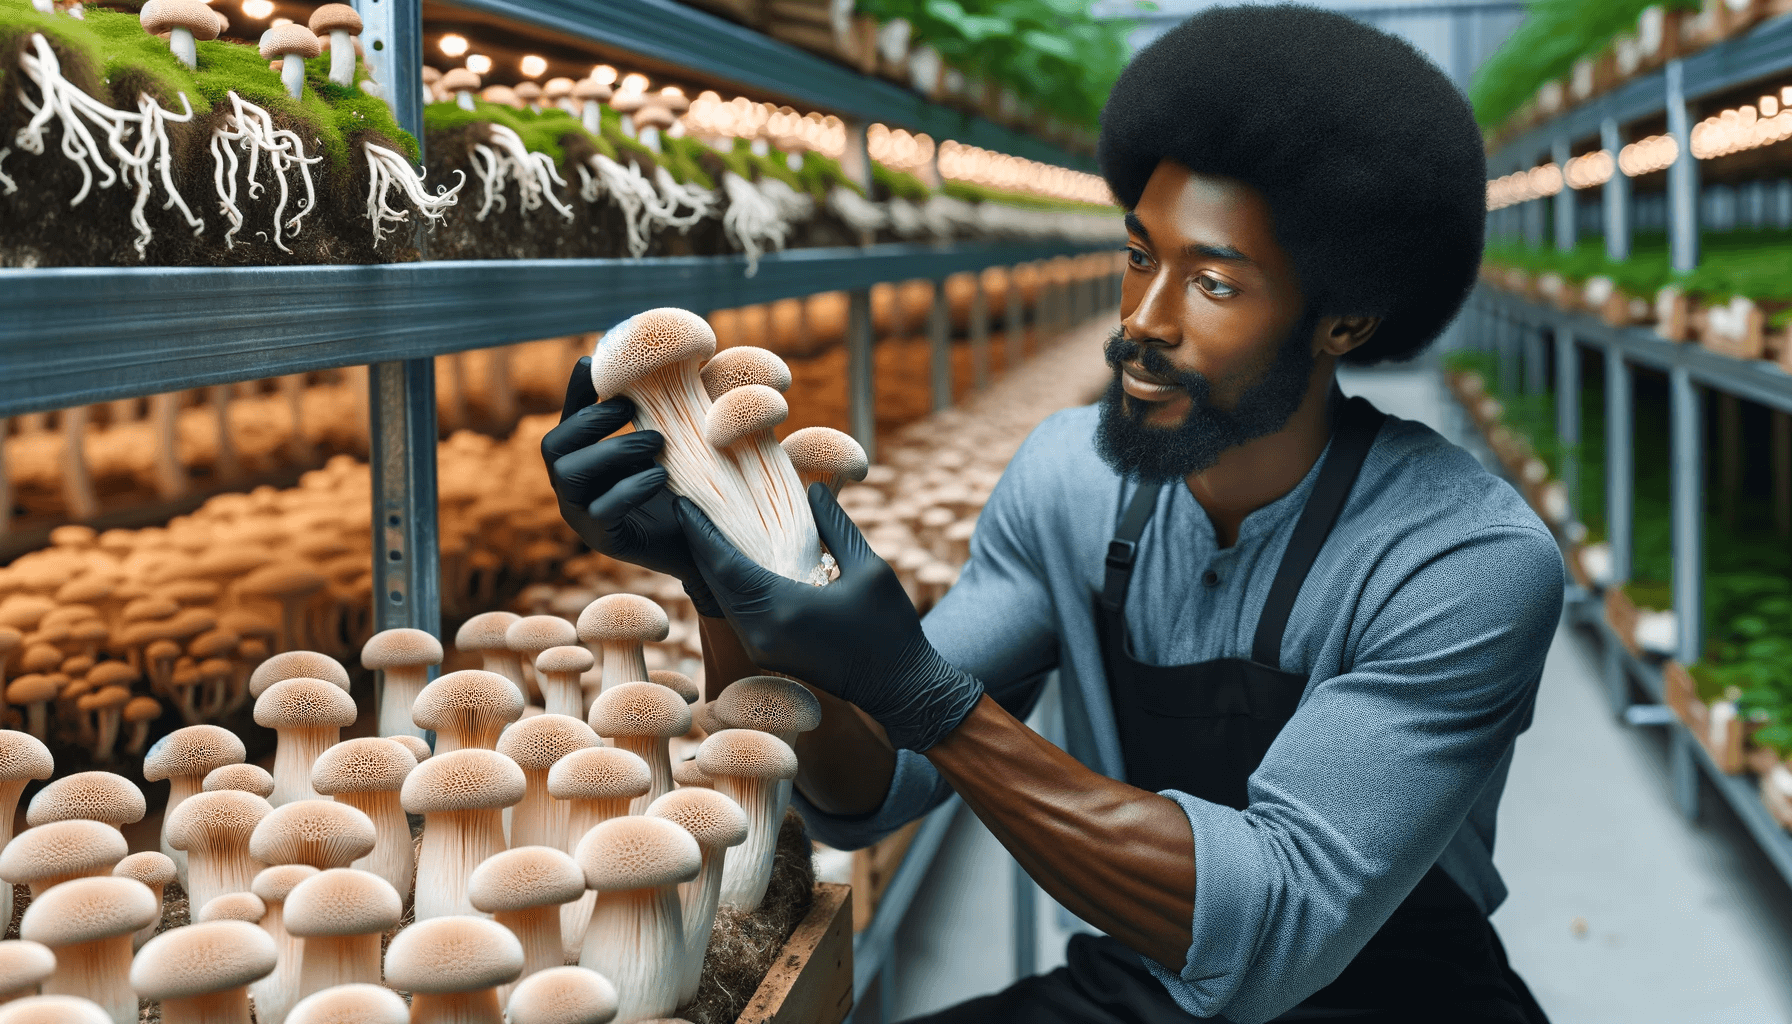 Certified organic Lion's Mane mushrooms being hand-selected by a trusted grower, ensuring the highest quality and purity for consumers seeking sustainable health products